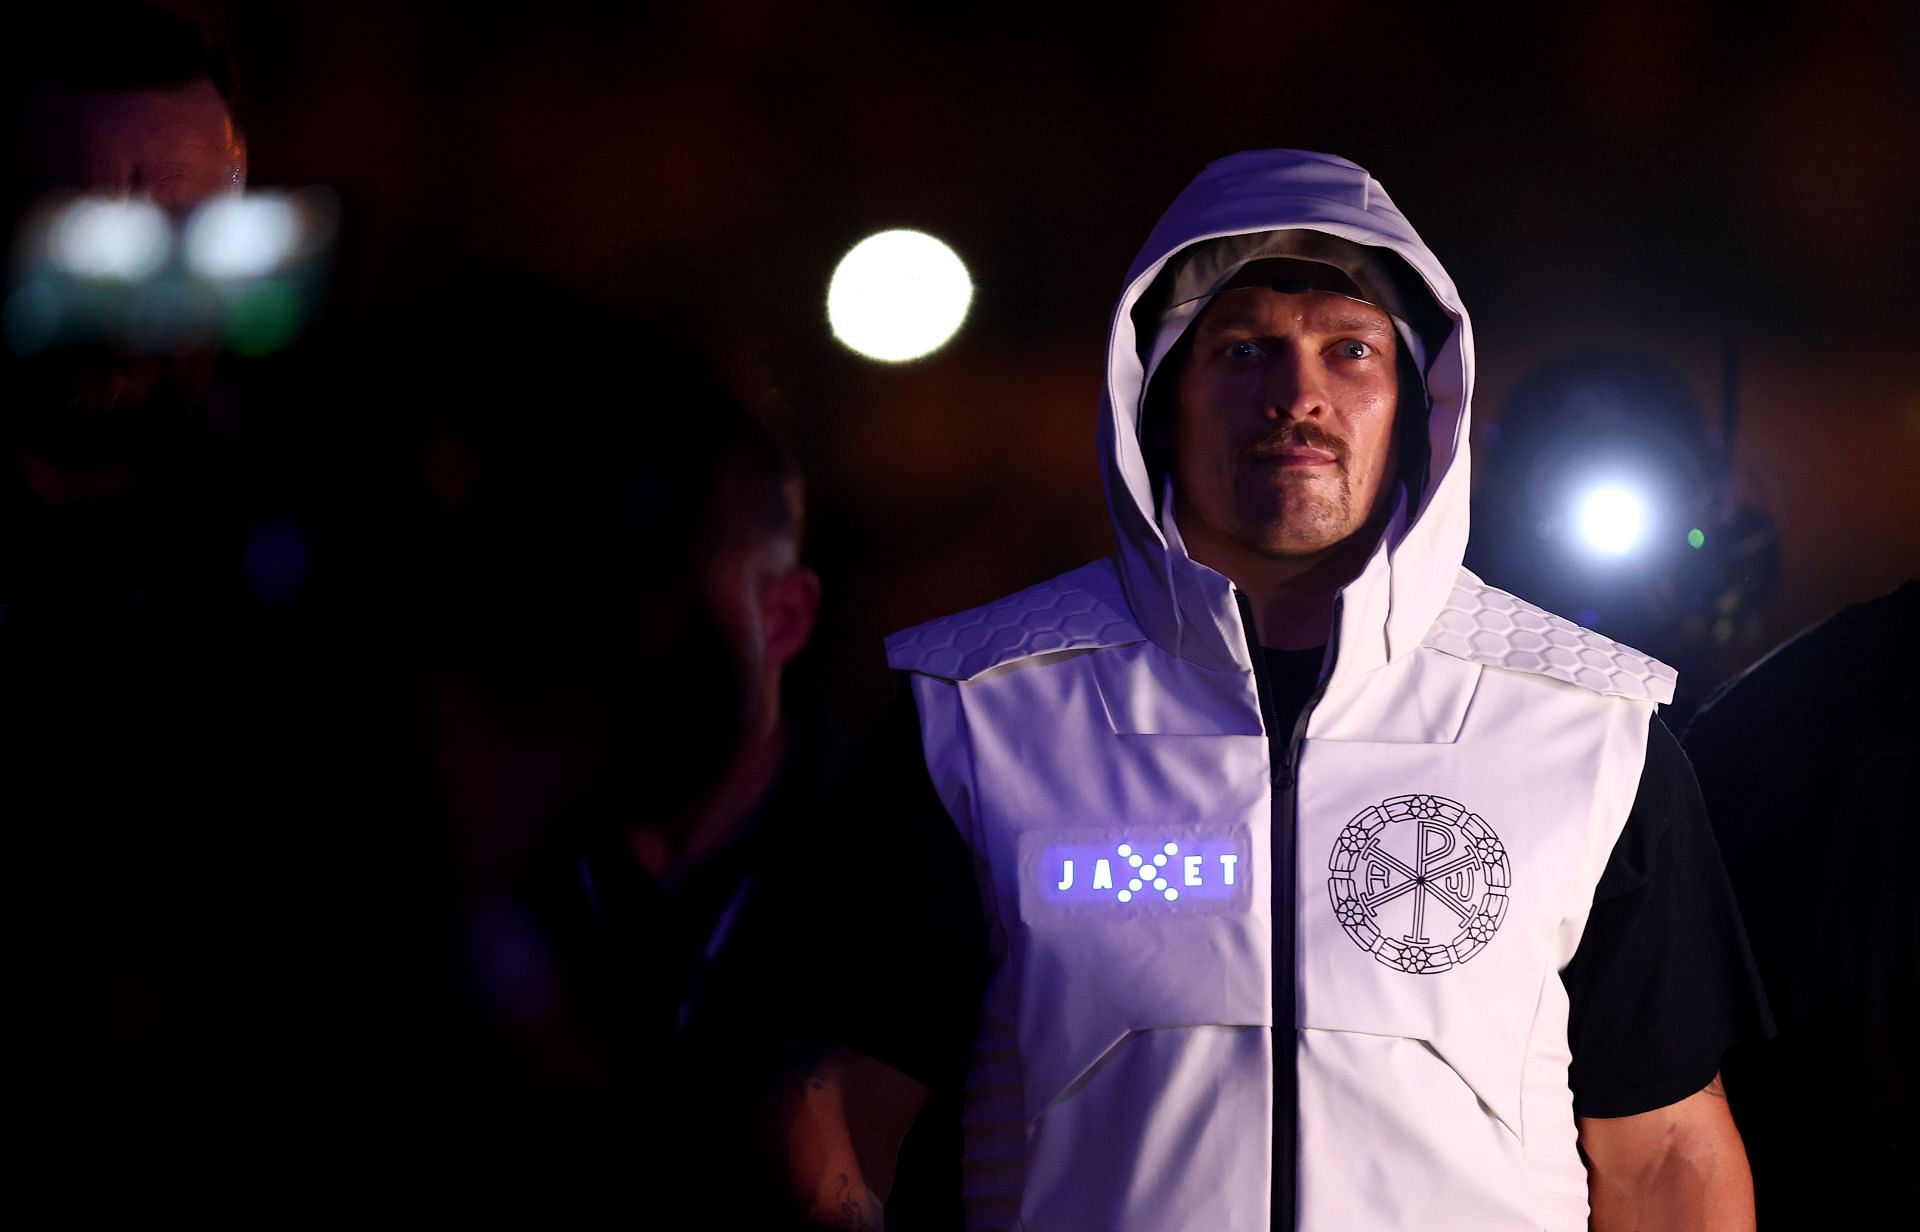 Oleksandr Usyk has given fans a glimpse into his training camp ahead of his rematch with Anthony Joshua.